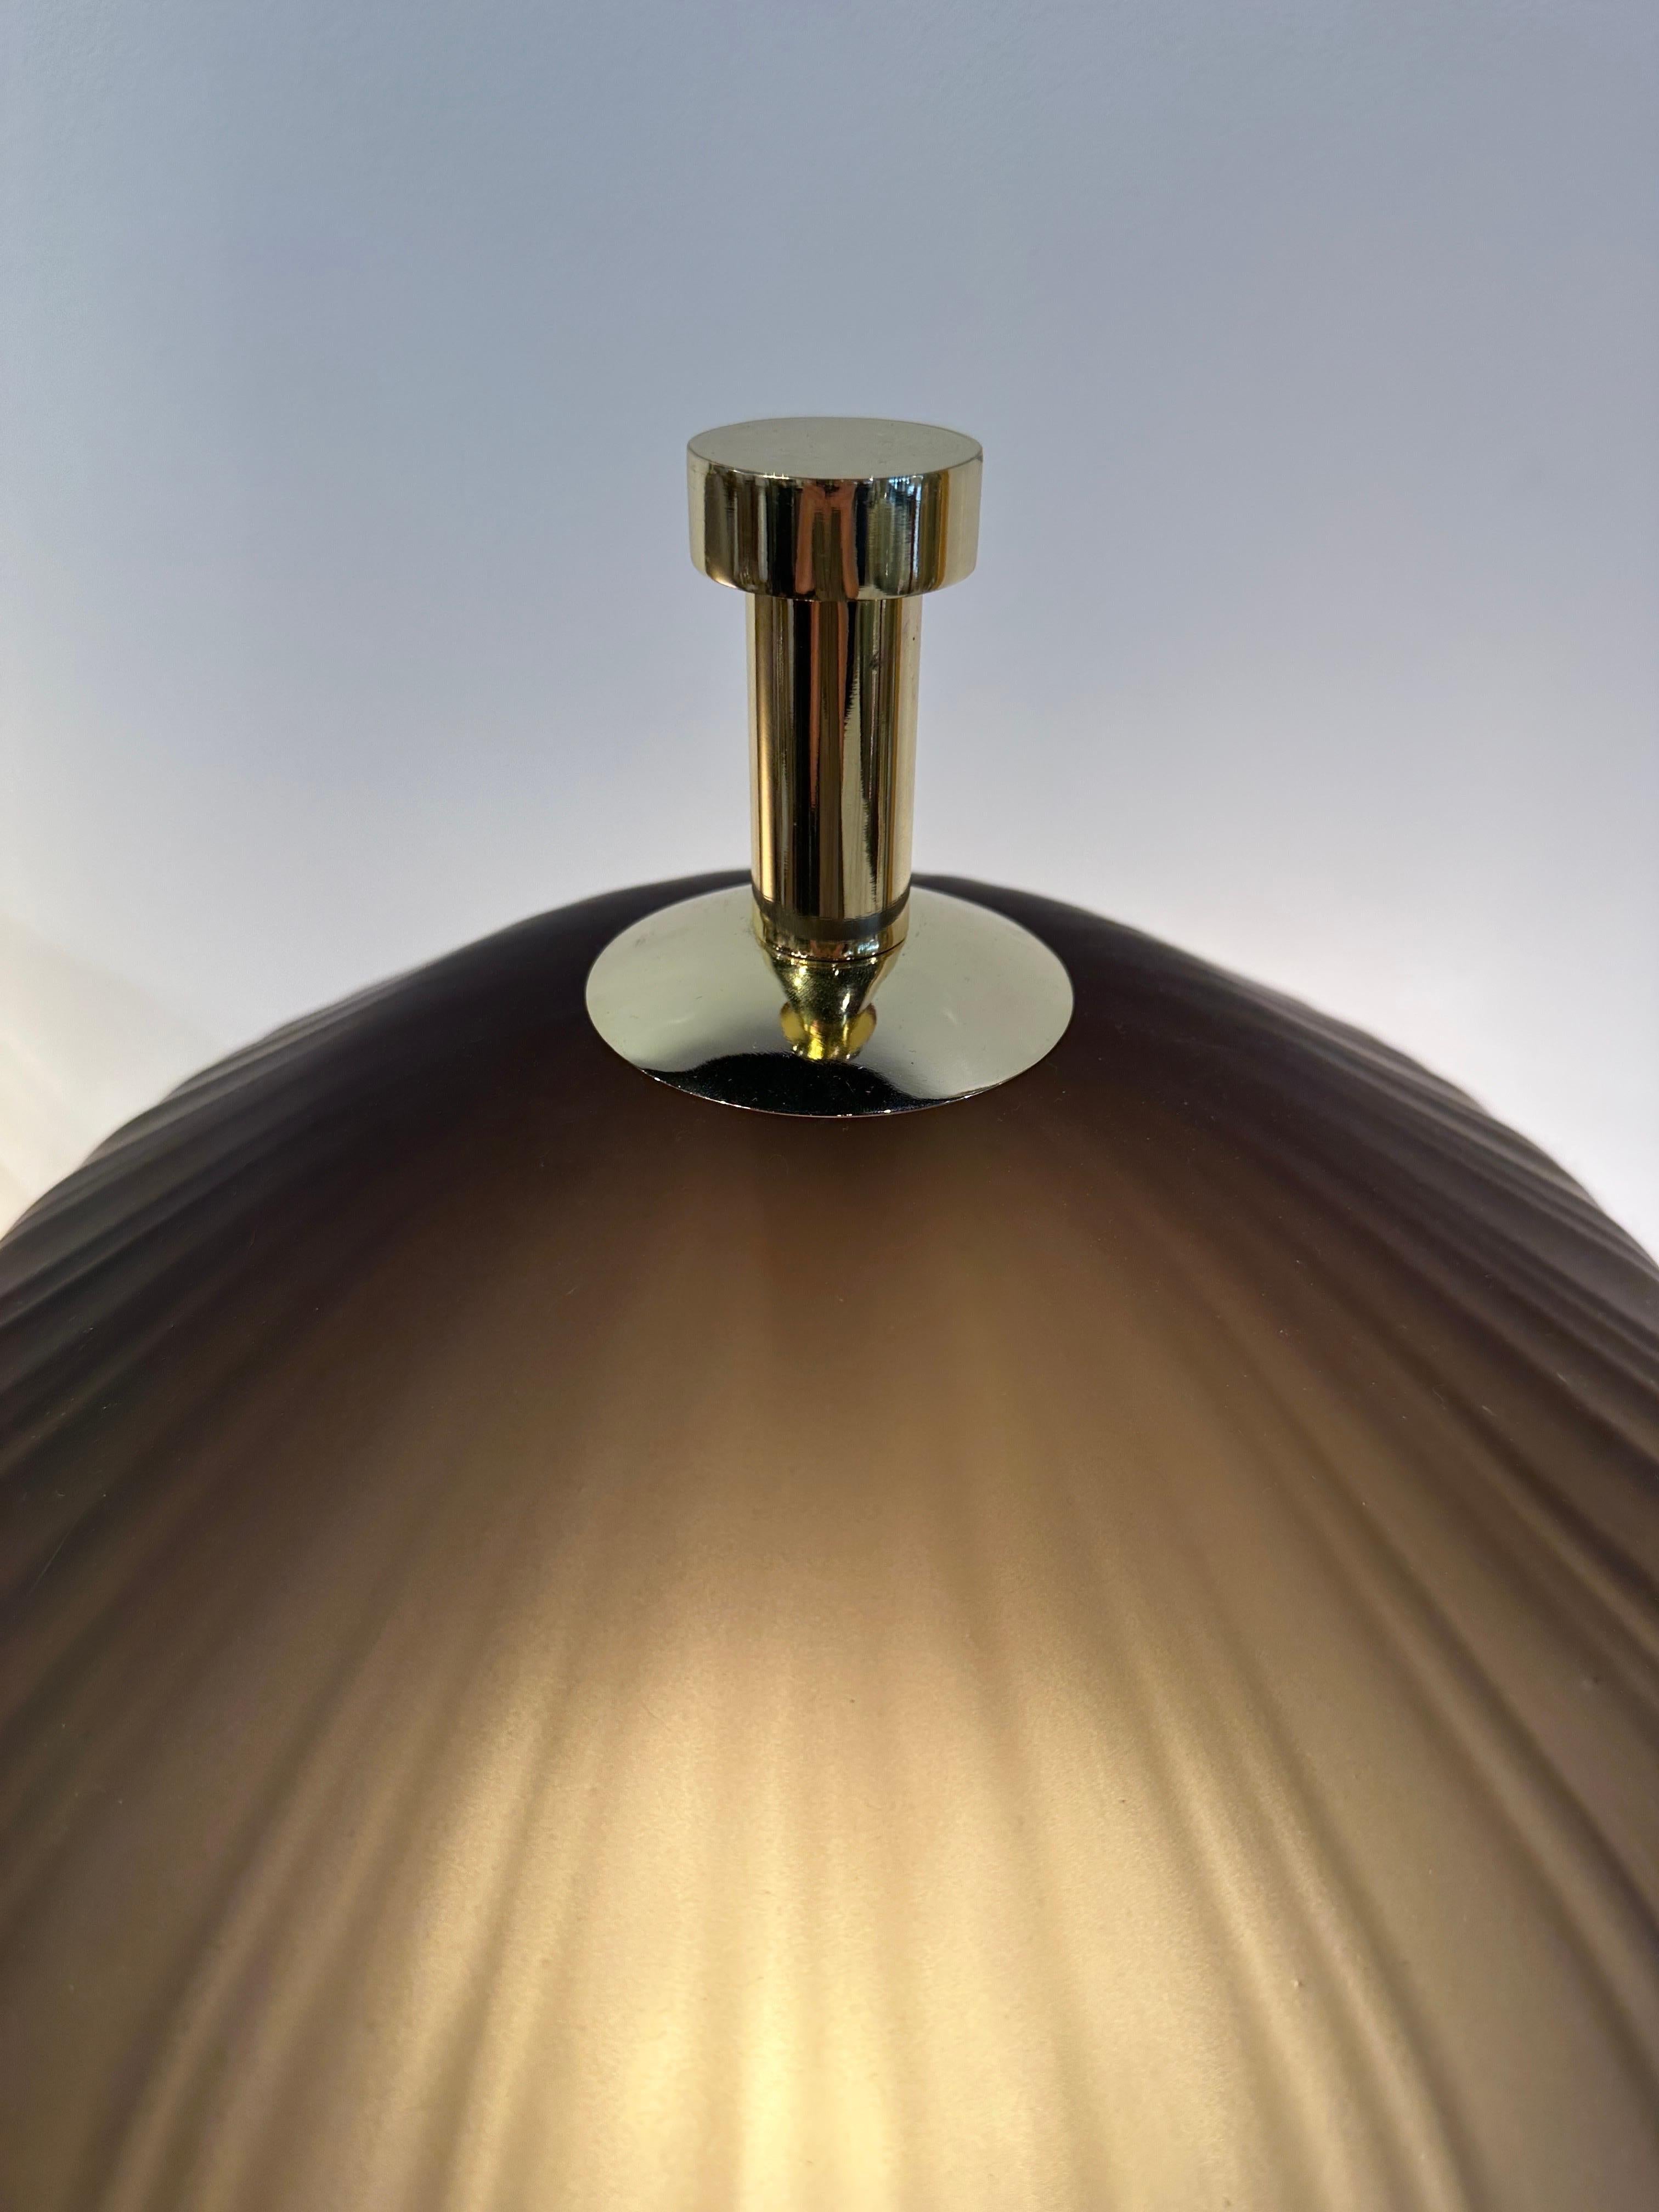 In the Japanese style these large Murano glass shades sit atop a brass base to create a whimsical modern take on a Japanese floating lantern design. The glass has a light brown hue when not illuminated and more of a caramel hue when illuminated -